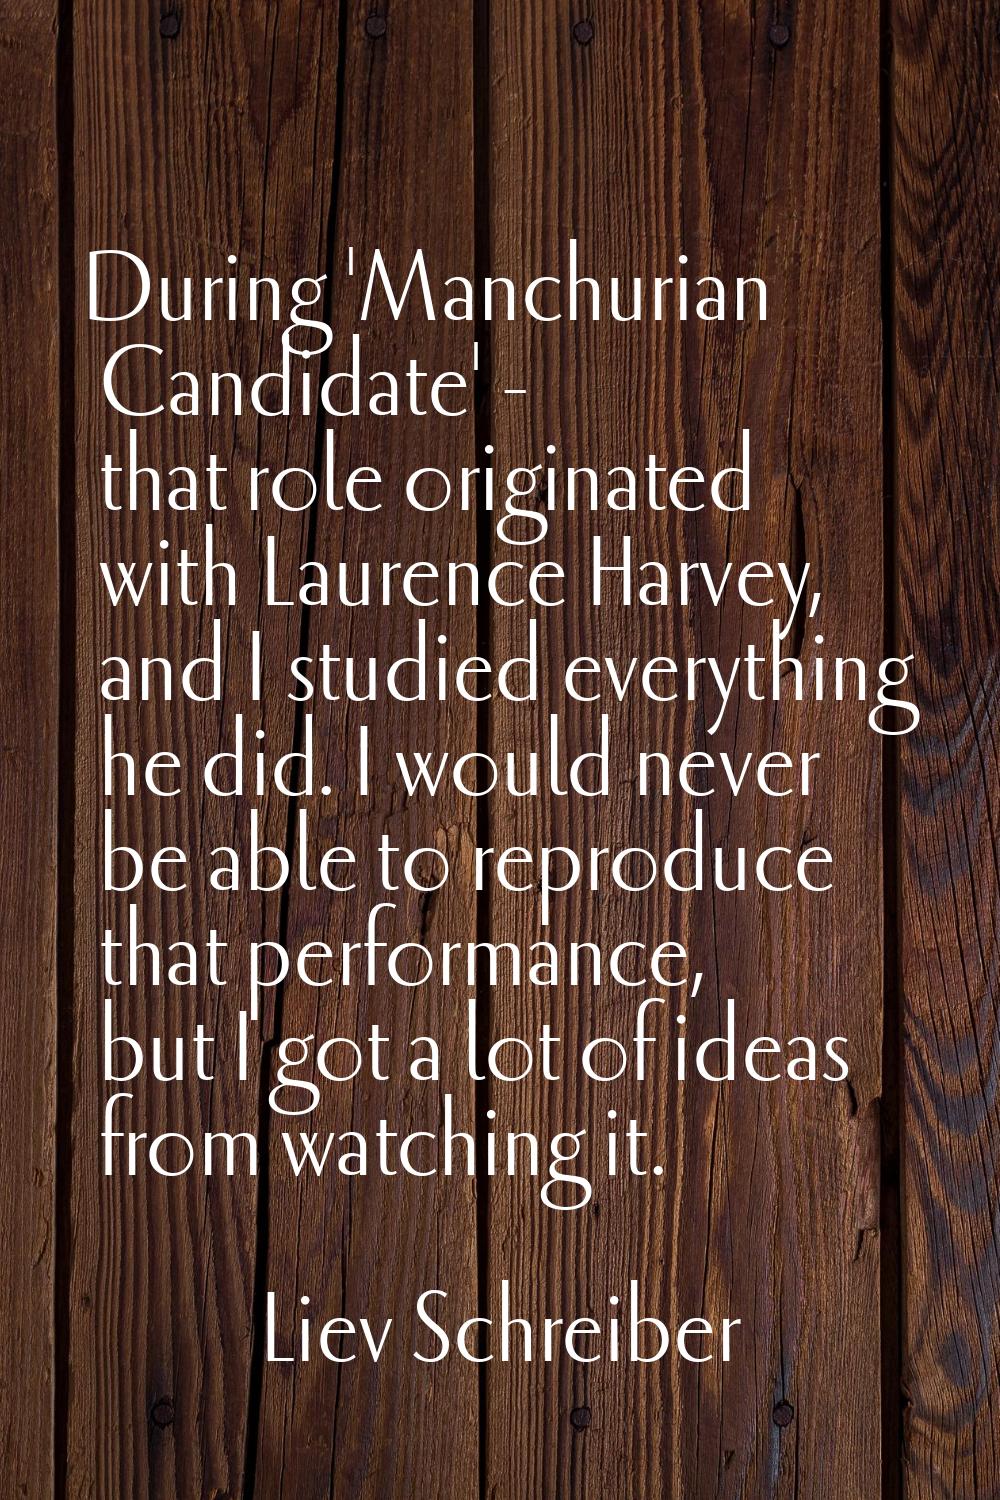 During 'Manchurian Candidate' - that role originated with Laurence Harvey, and I studied everything